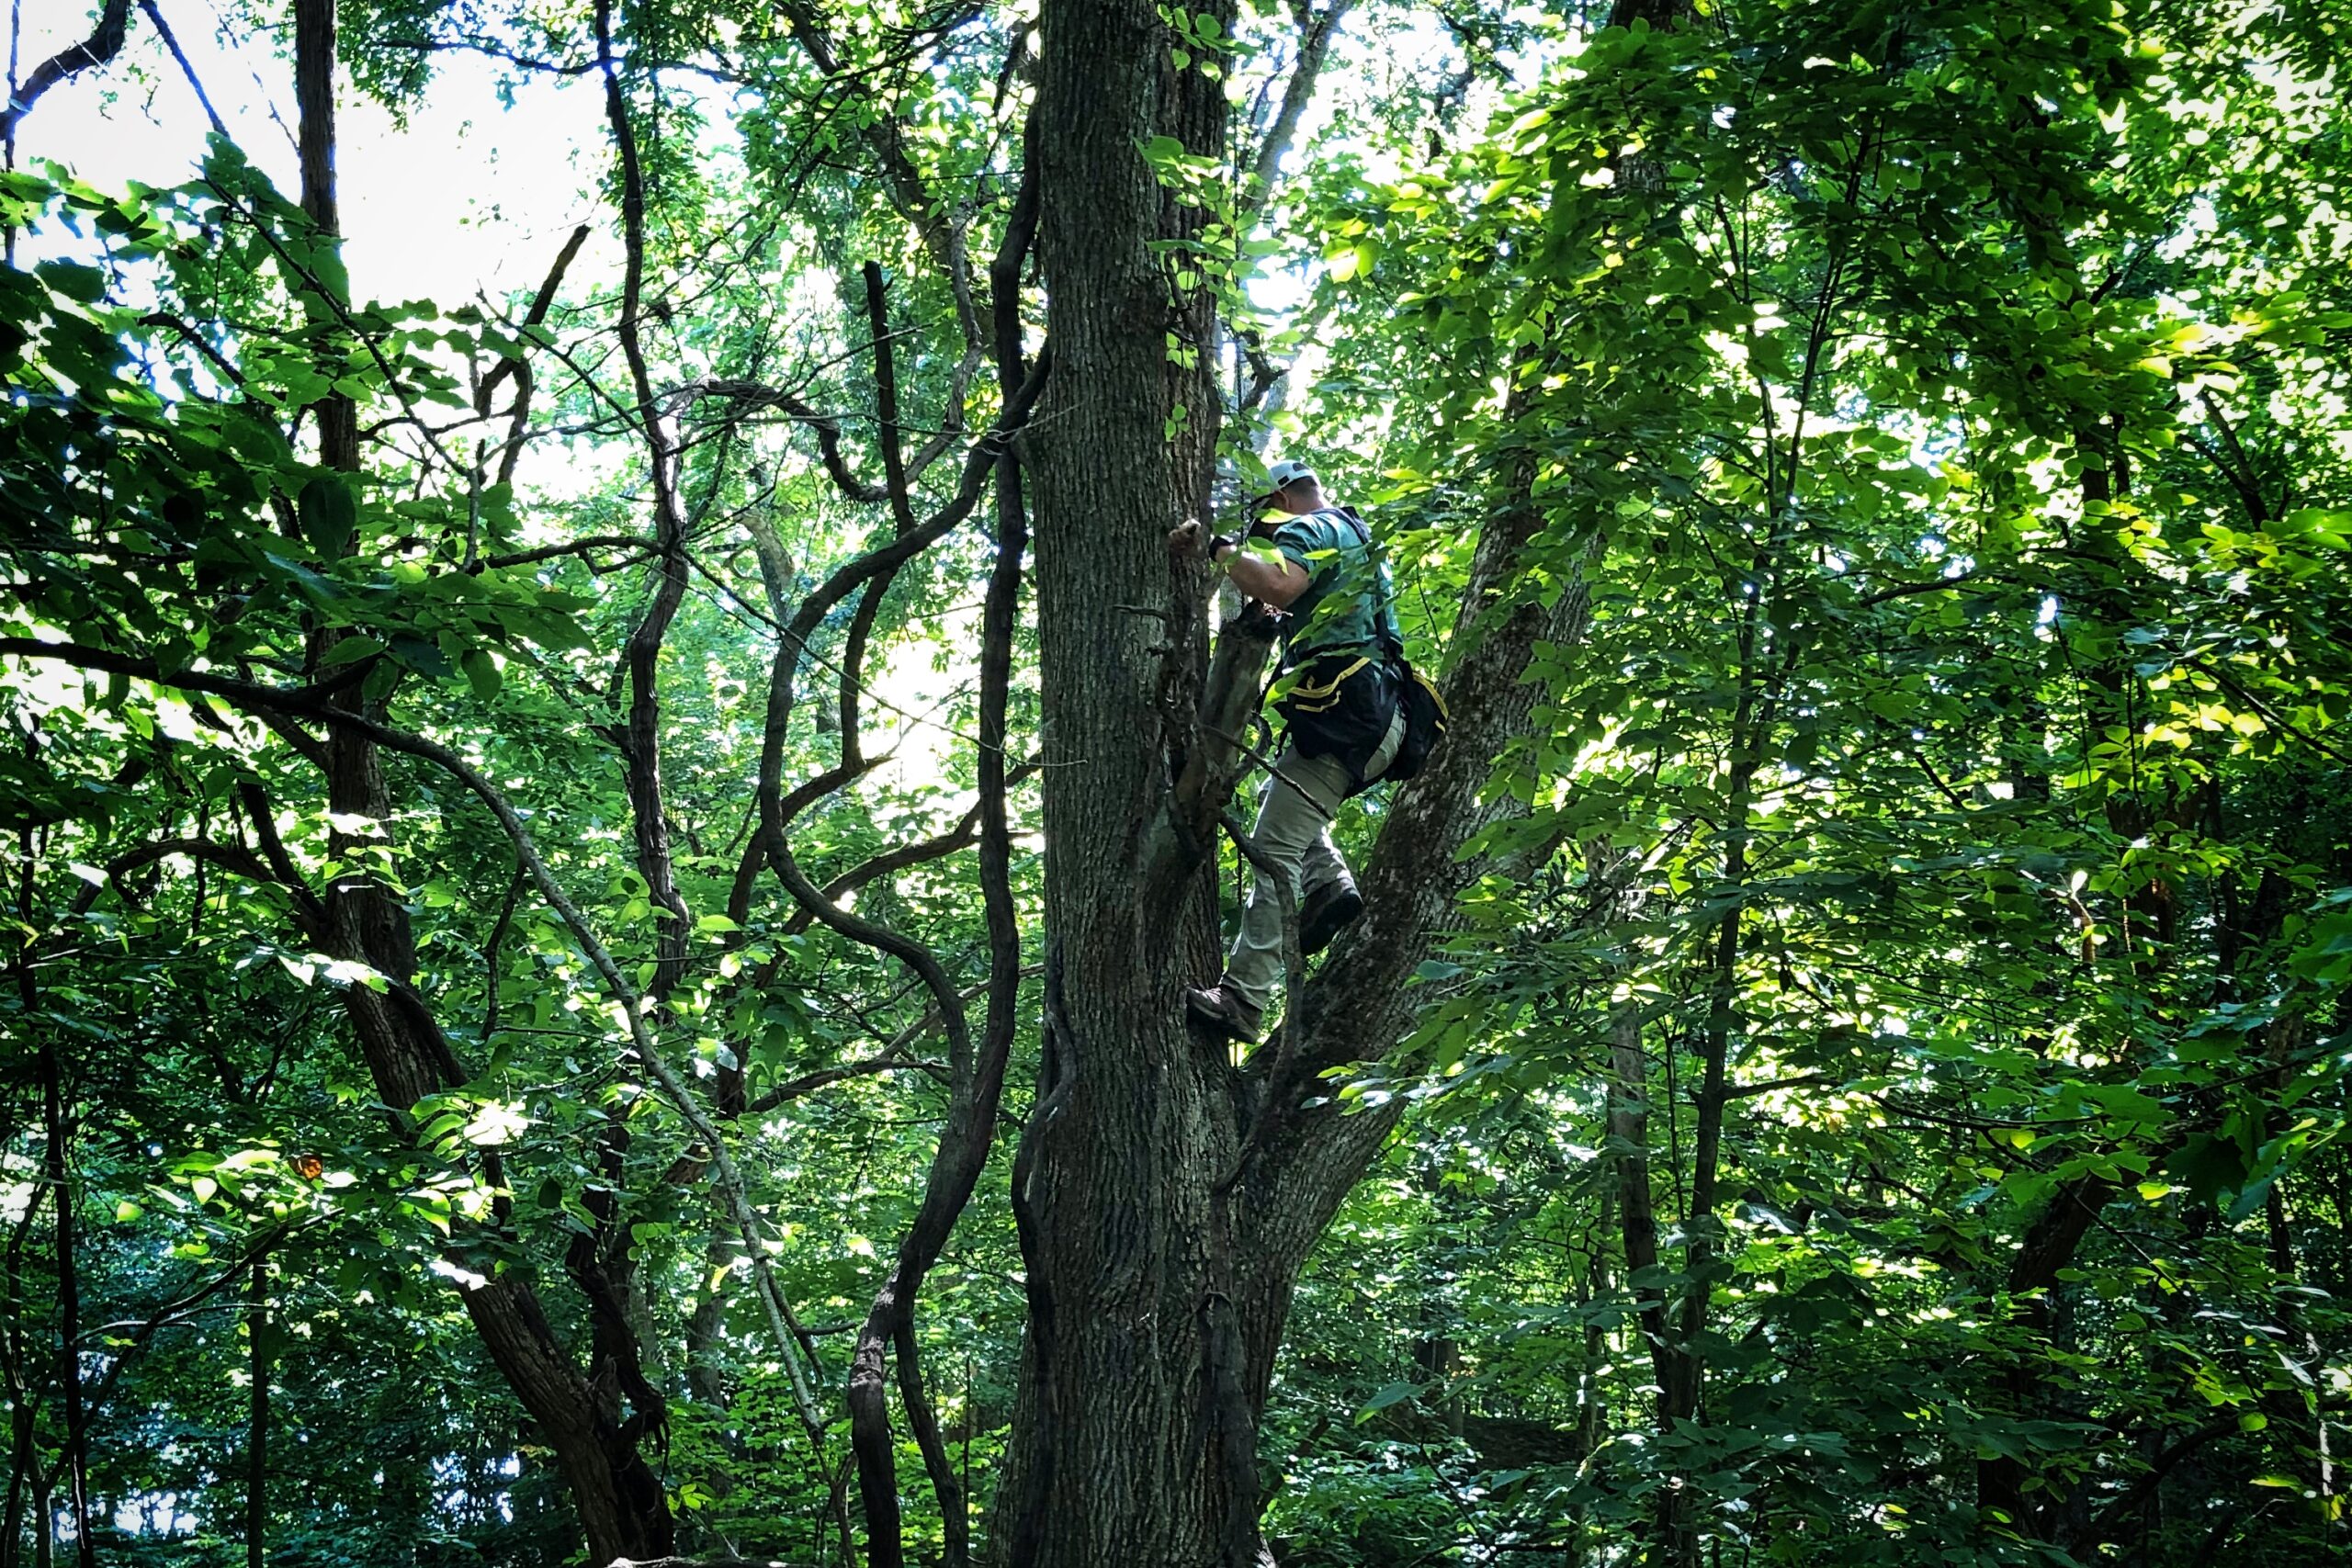 A treestand fall is absolutely preventable with the appropriate safety precautions.